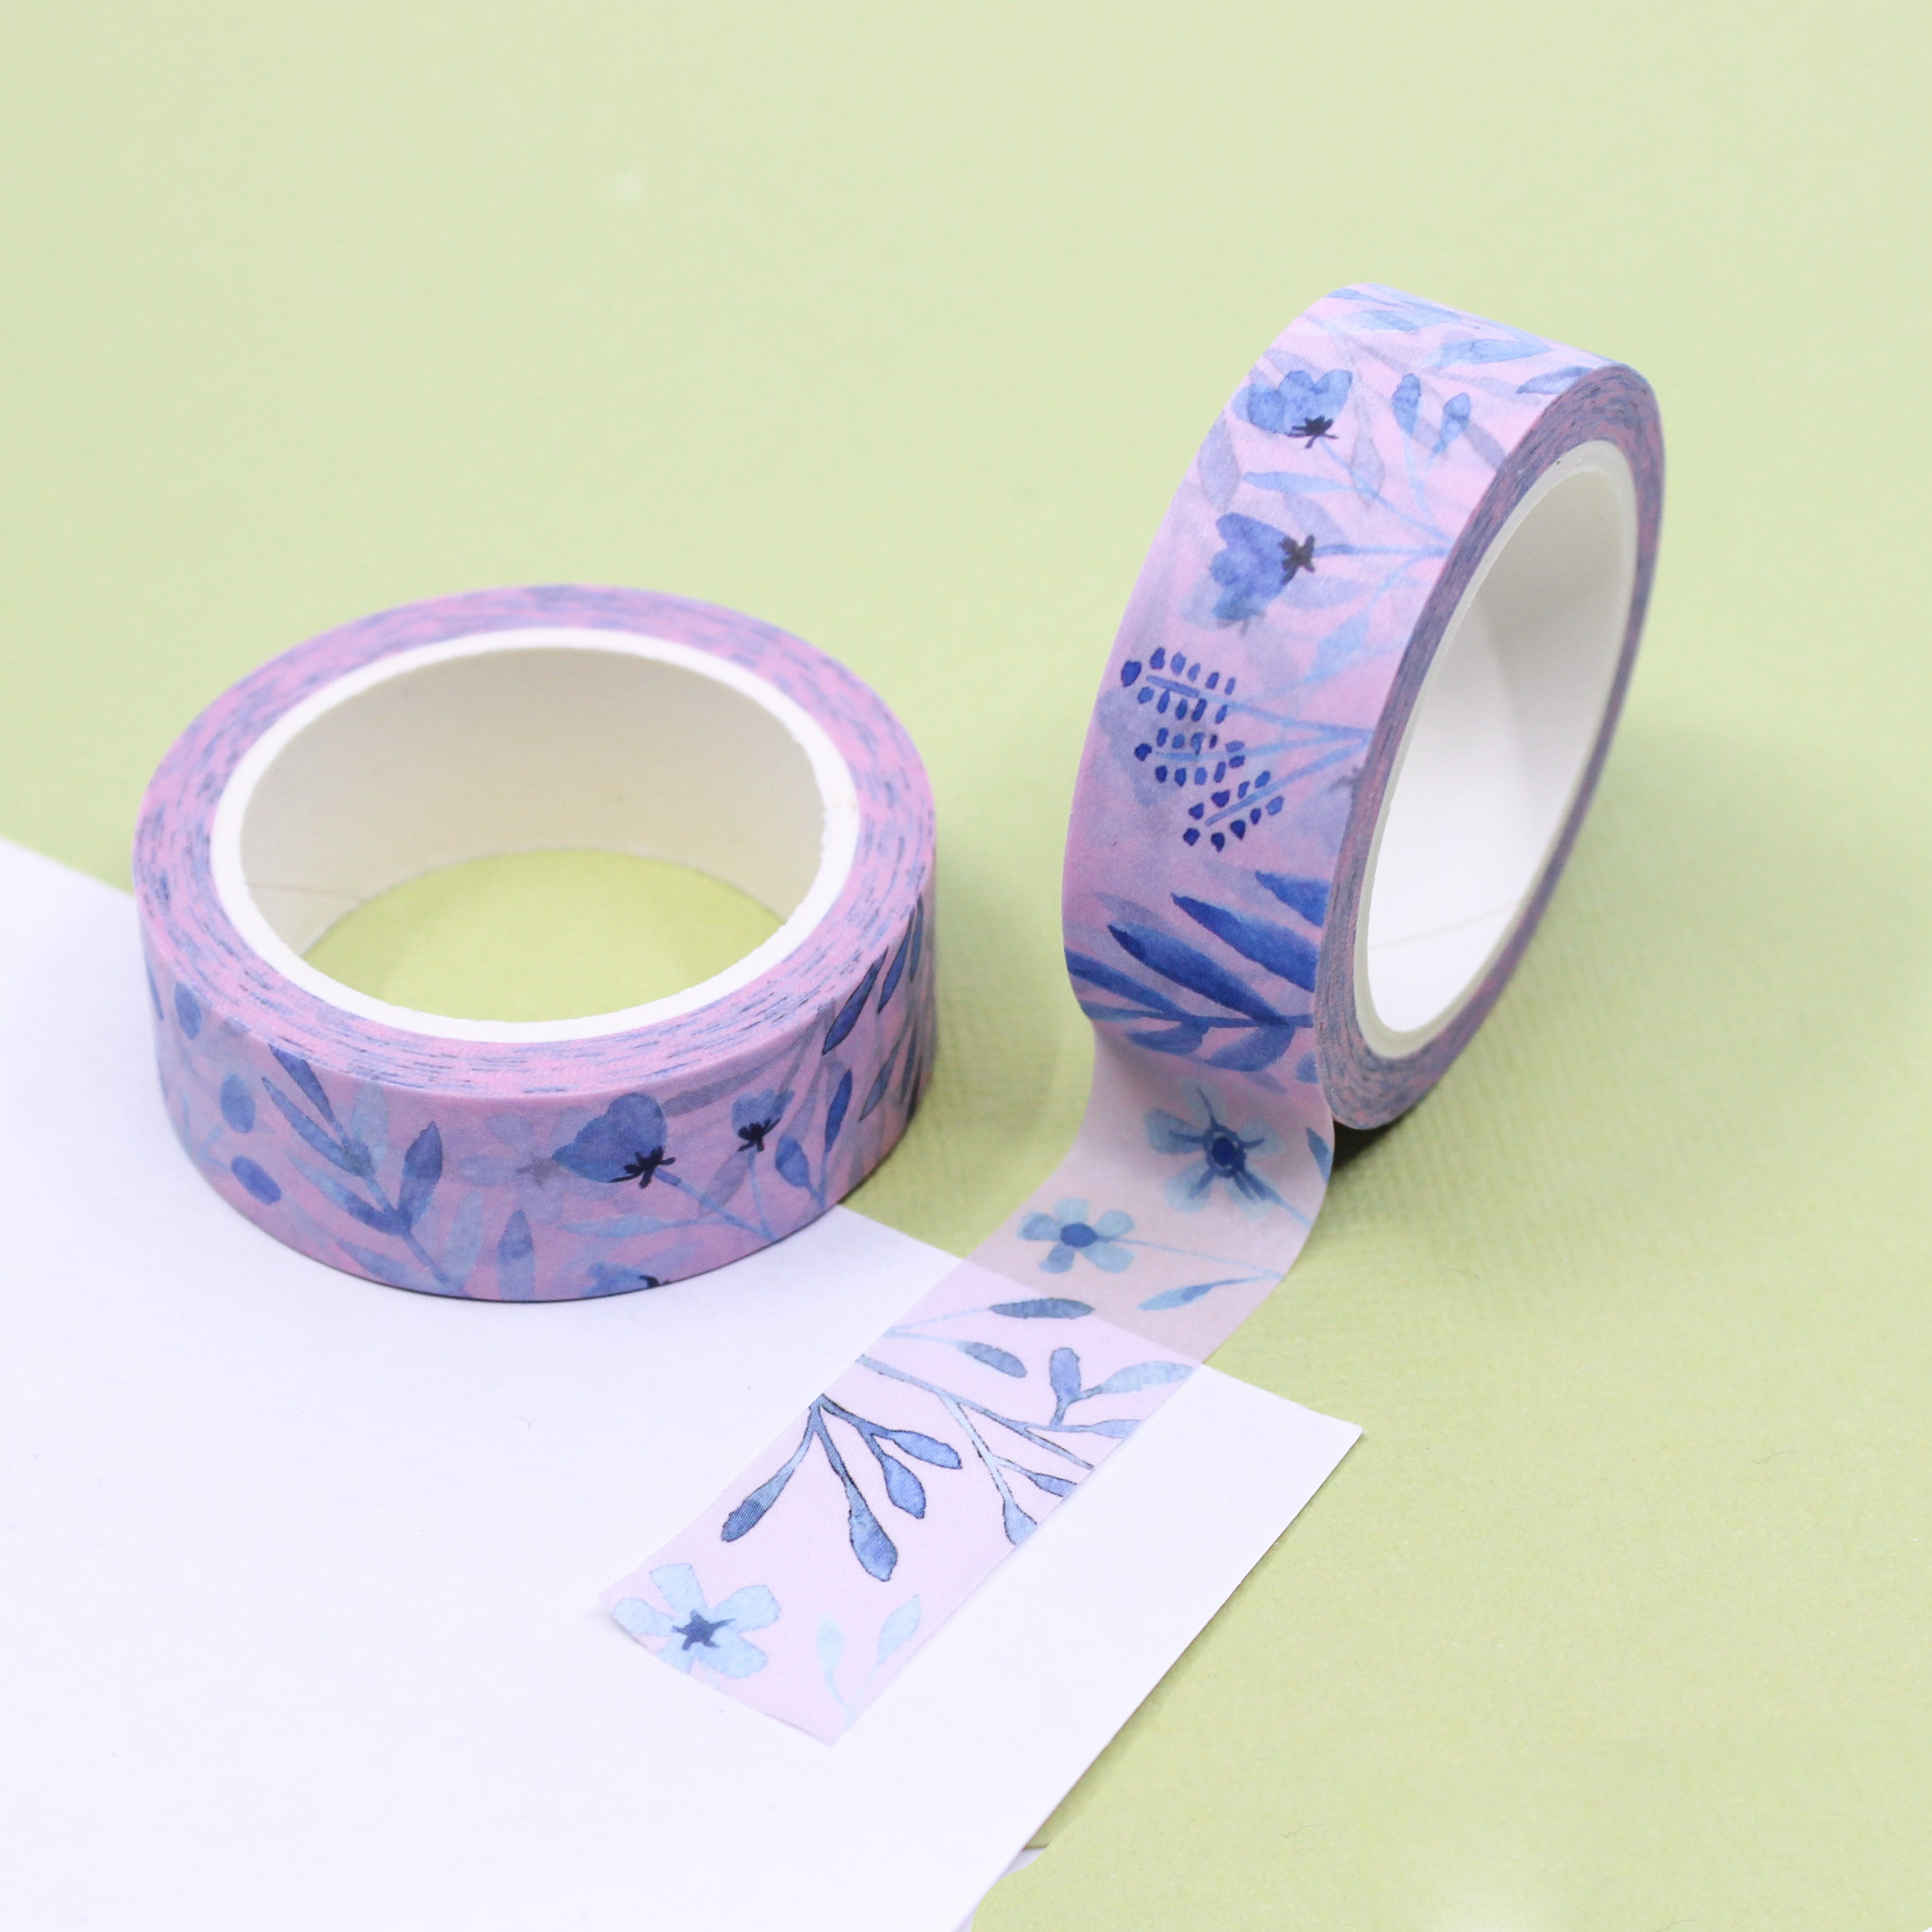 Enhance your crafts with our Lavender and Blue Floral Washi Tape, featuring a charming floral pattern in shades of lavender and blue. Ideal for adding a touch of elegance and nature to your projects. This tape is designed by Sarah Francis and sold at BBB Supplies Craft Shop.